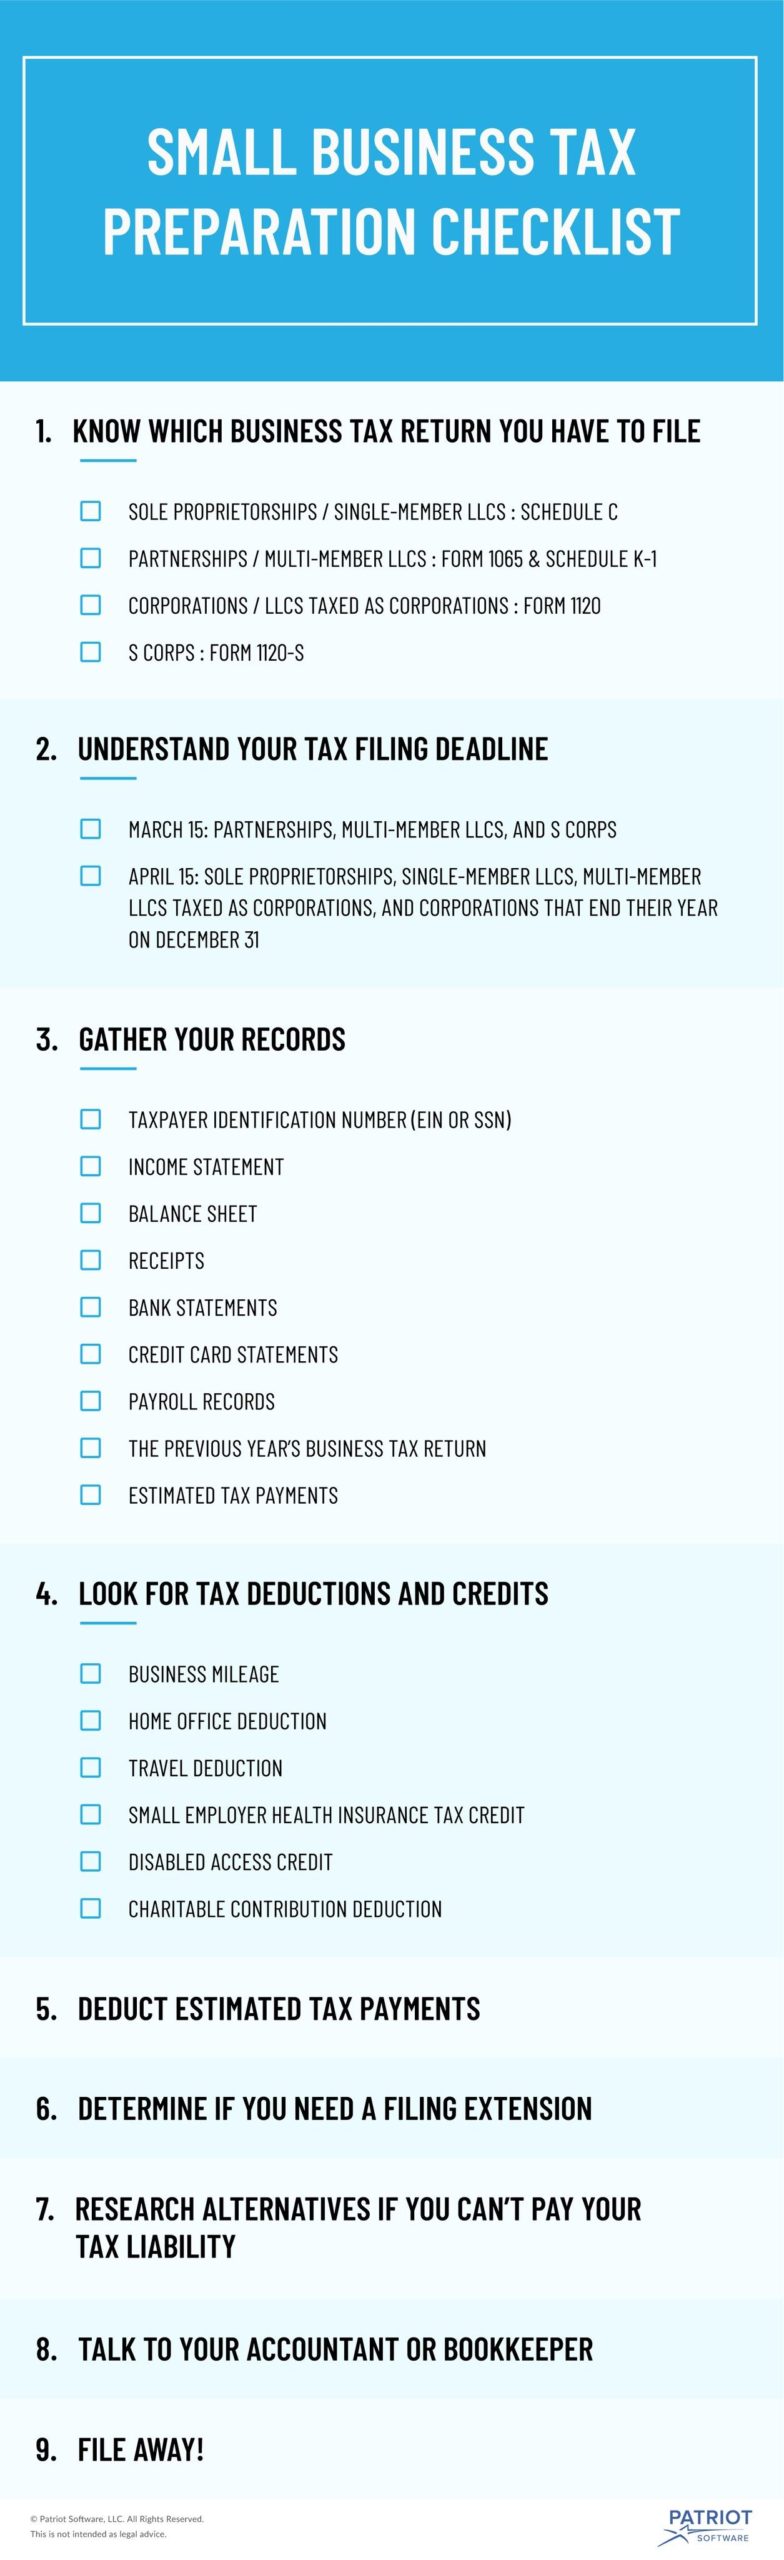 Small Business Tax Preparation Checklist Scaled 